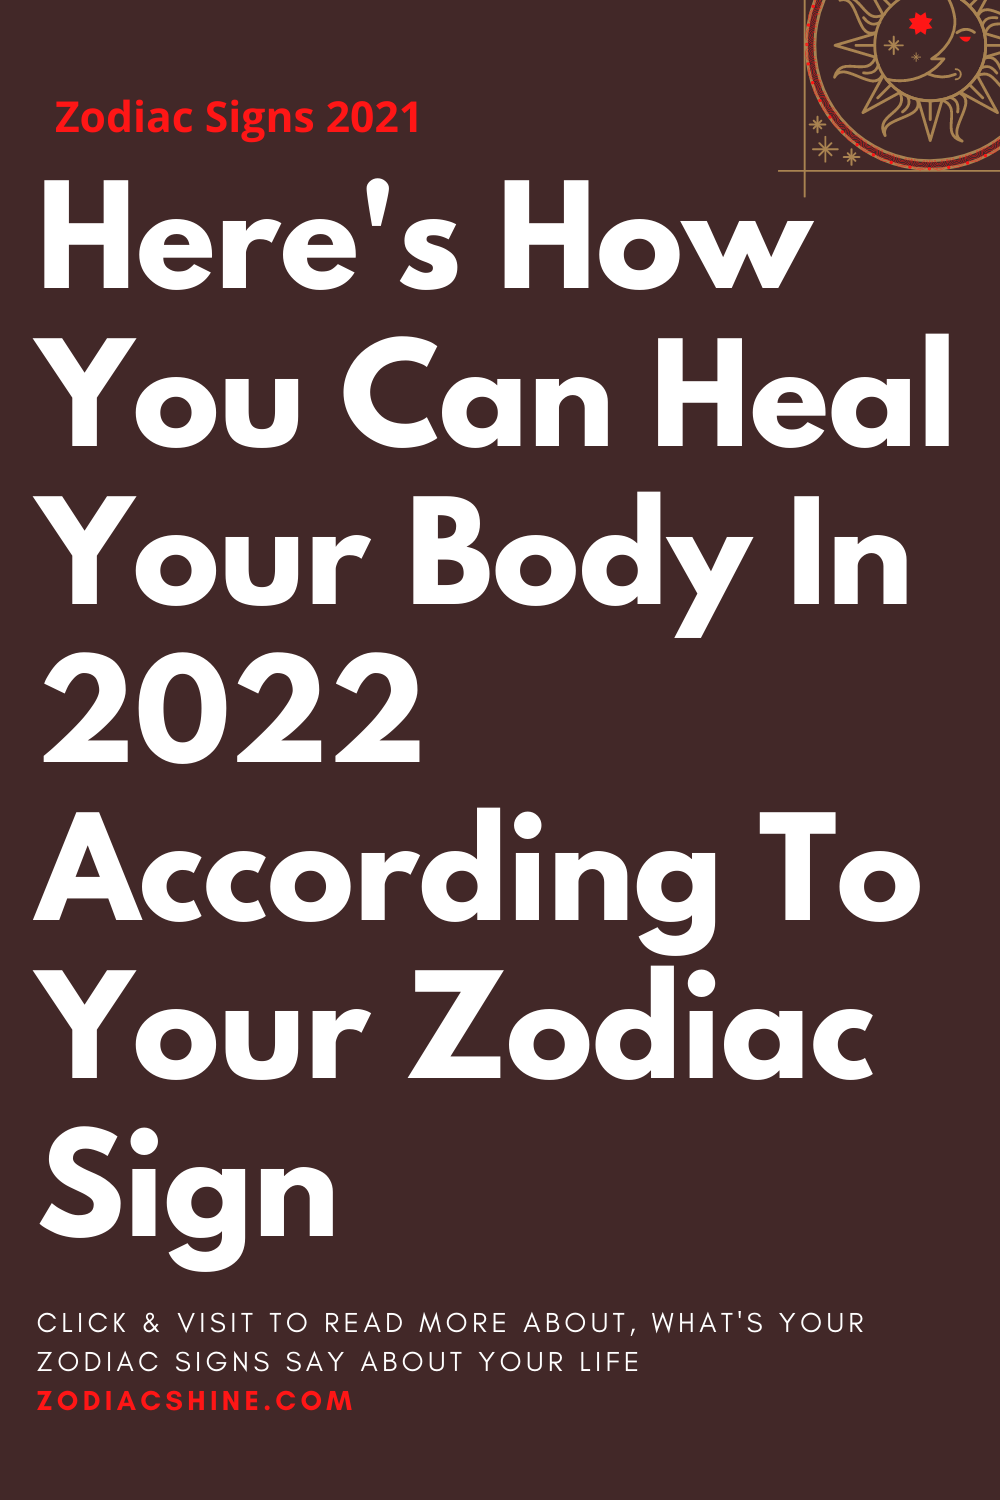 Here's How You Can Heal Your Body In 2022 According To Your Zodiac Sign